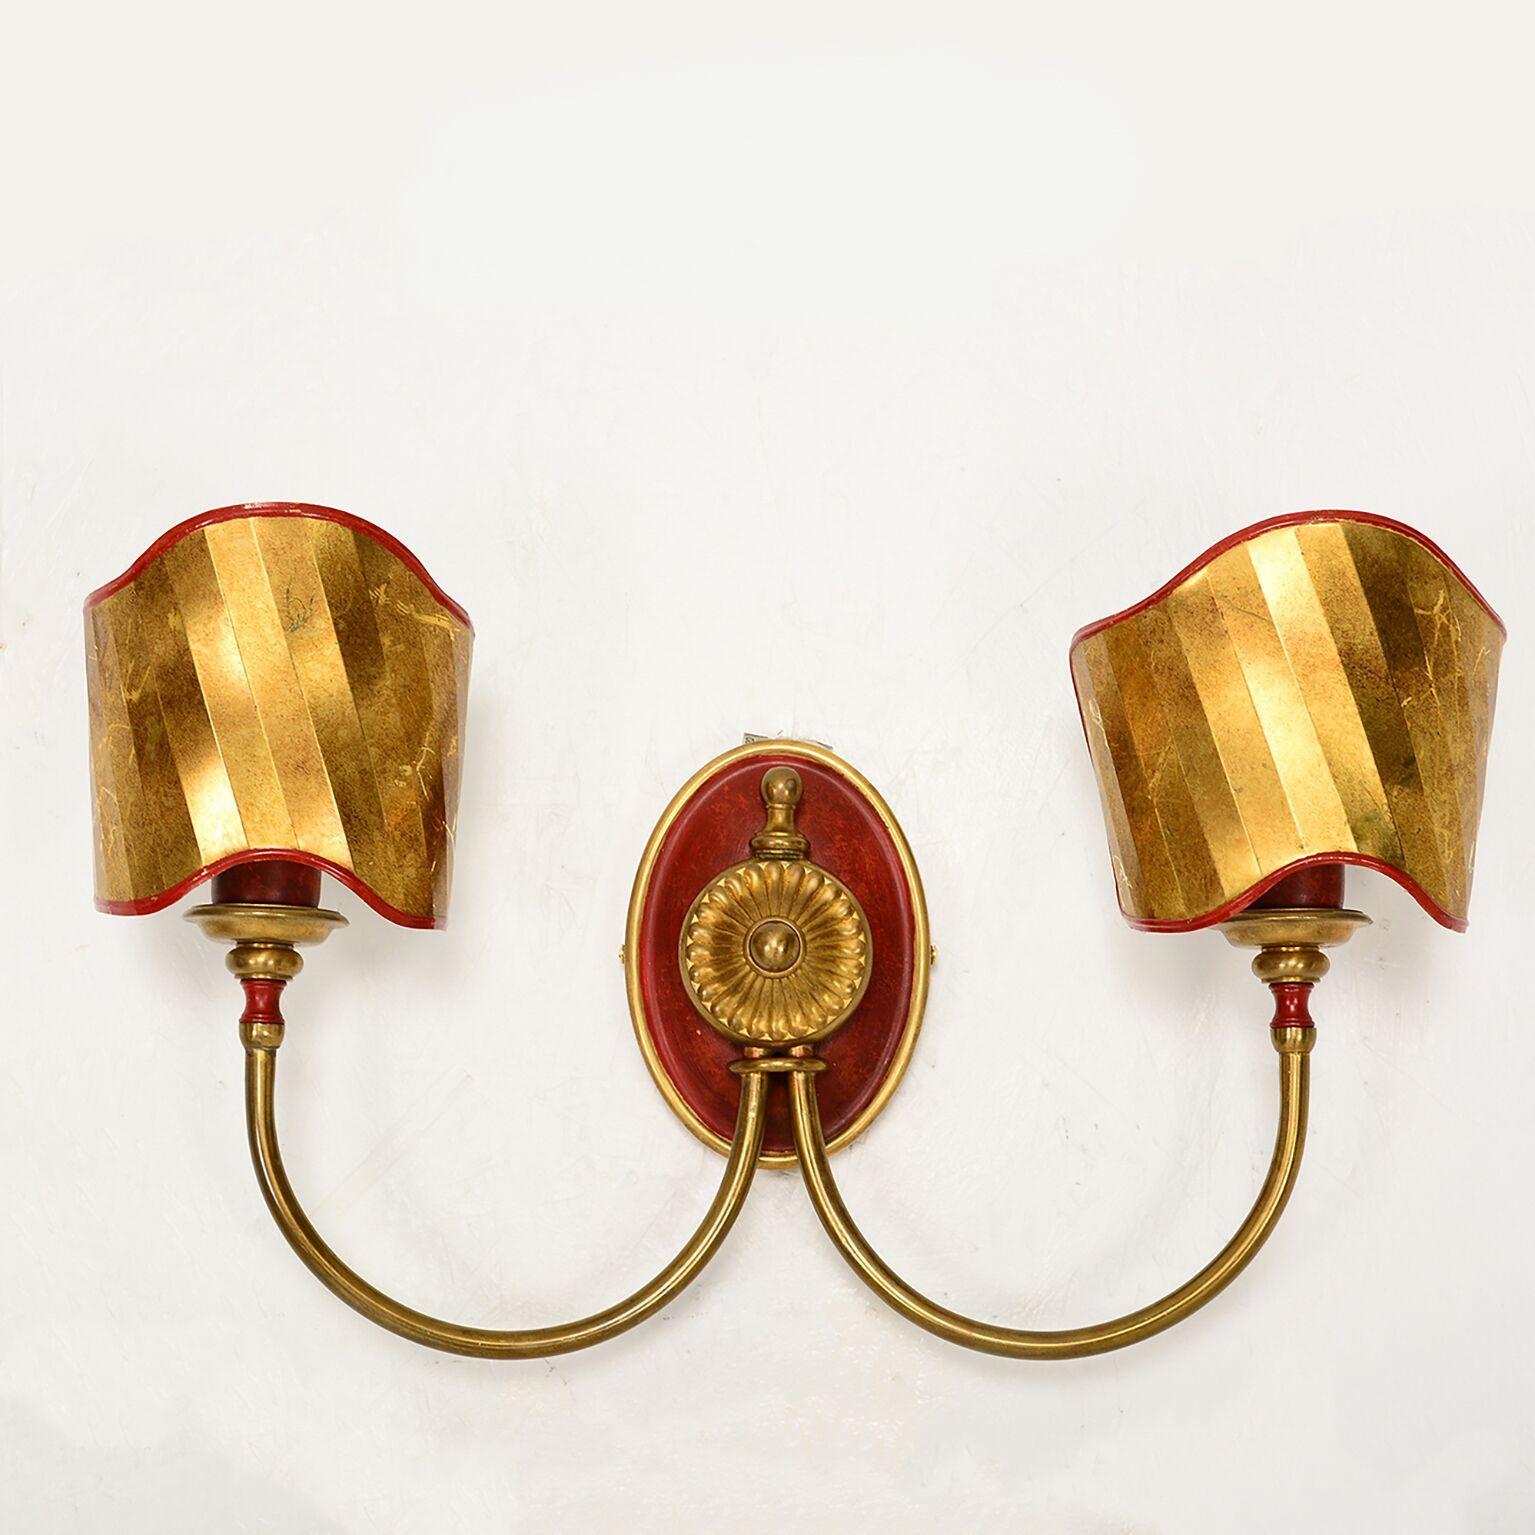 For your consideration: an elegant pair of Italian wall sconces with decorative brass shield.
In the Style of Gio Ponti.  Circa 1980s 
Measures: H 13 in. x  W 20.13 in. x  D 5.38 in. 
Original Vintage Condition. Refer to images.  Expect vintage